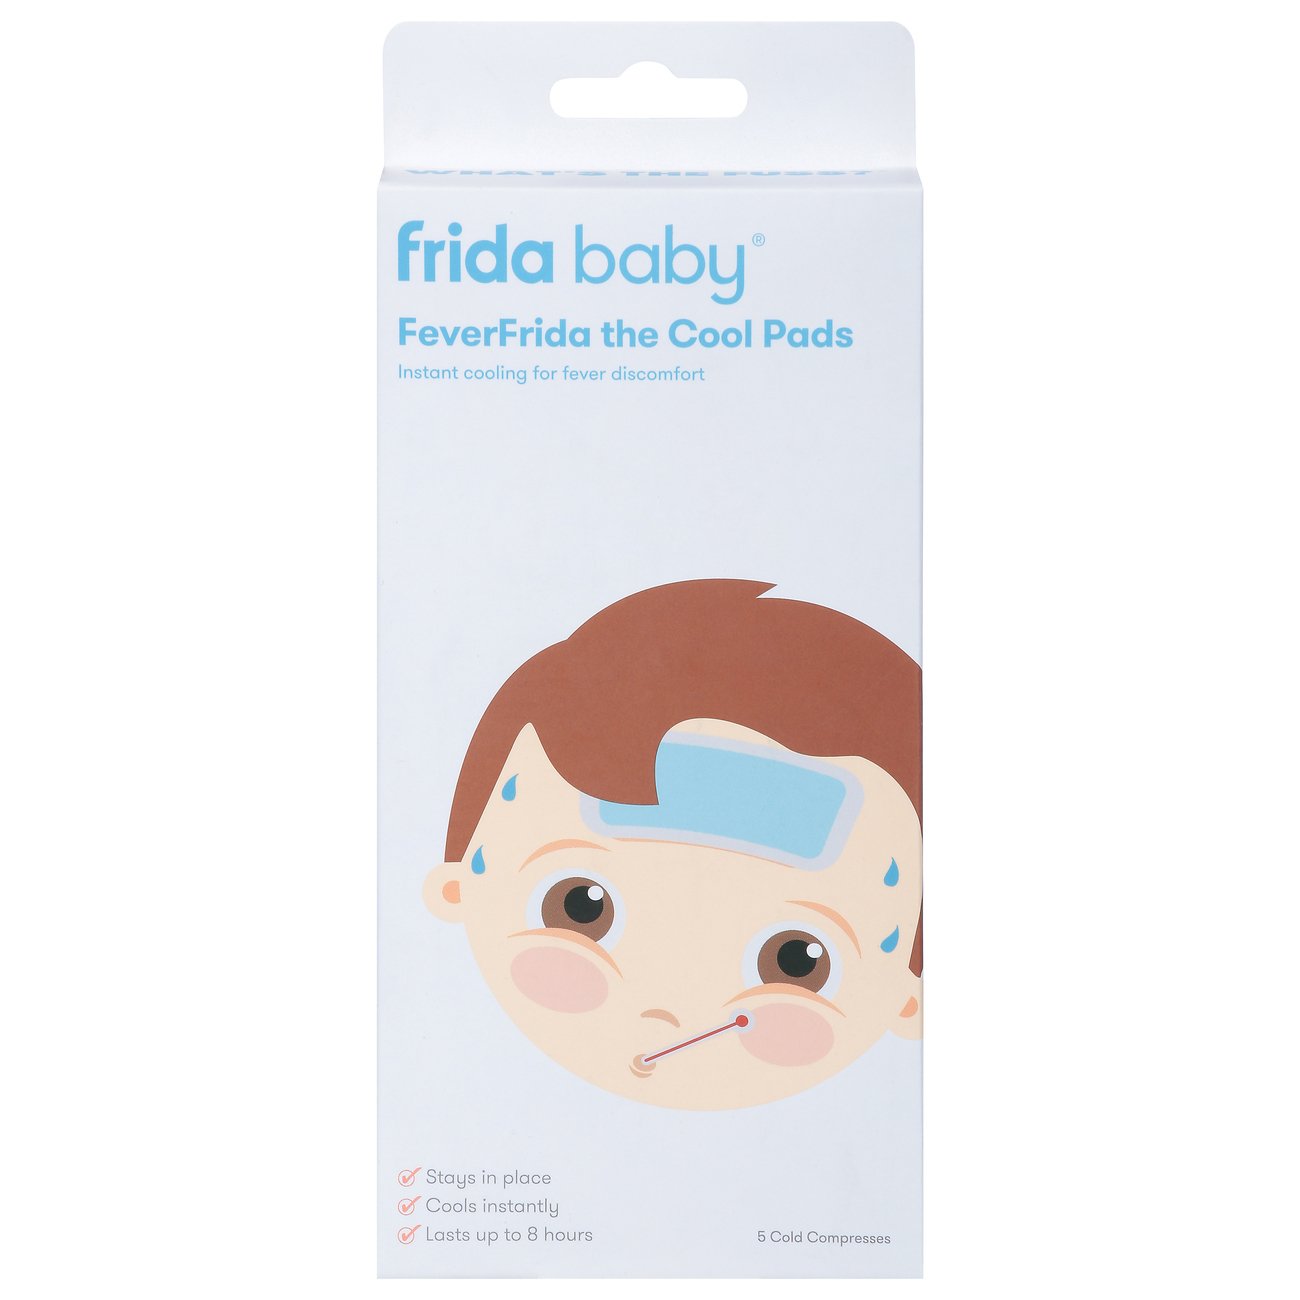 Patch-type wearable thermometers. (a) FeverFrida TM and (b) Fever Smart.